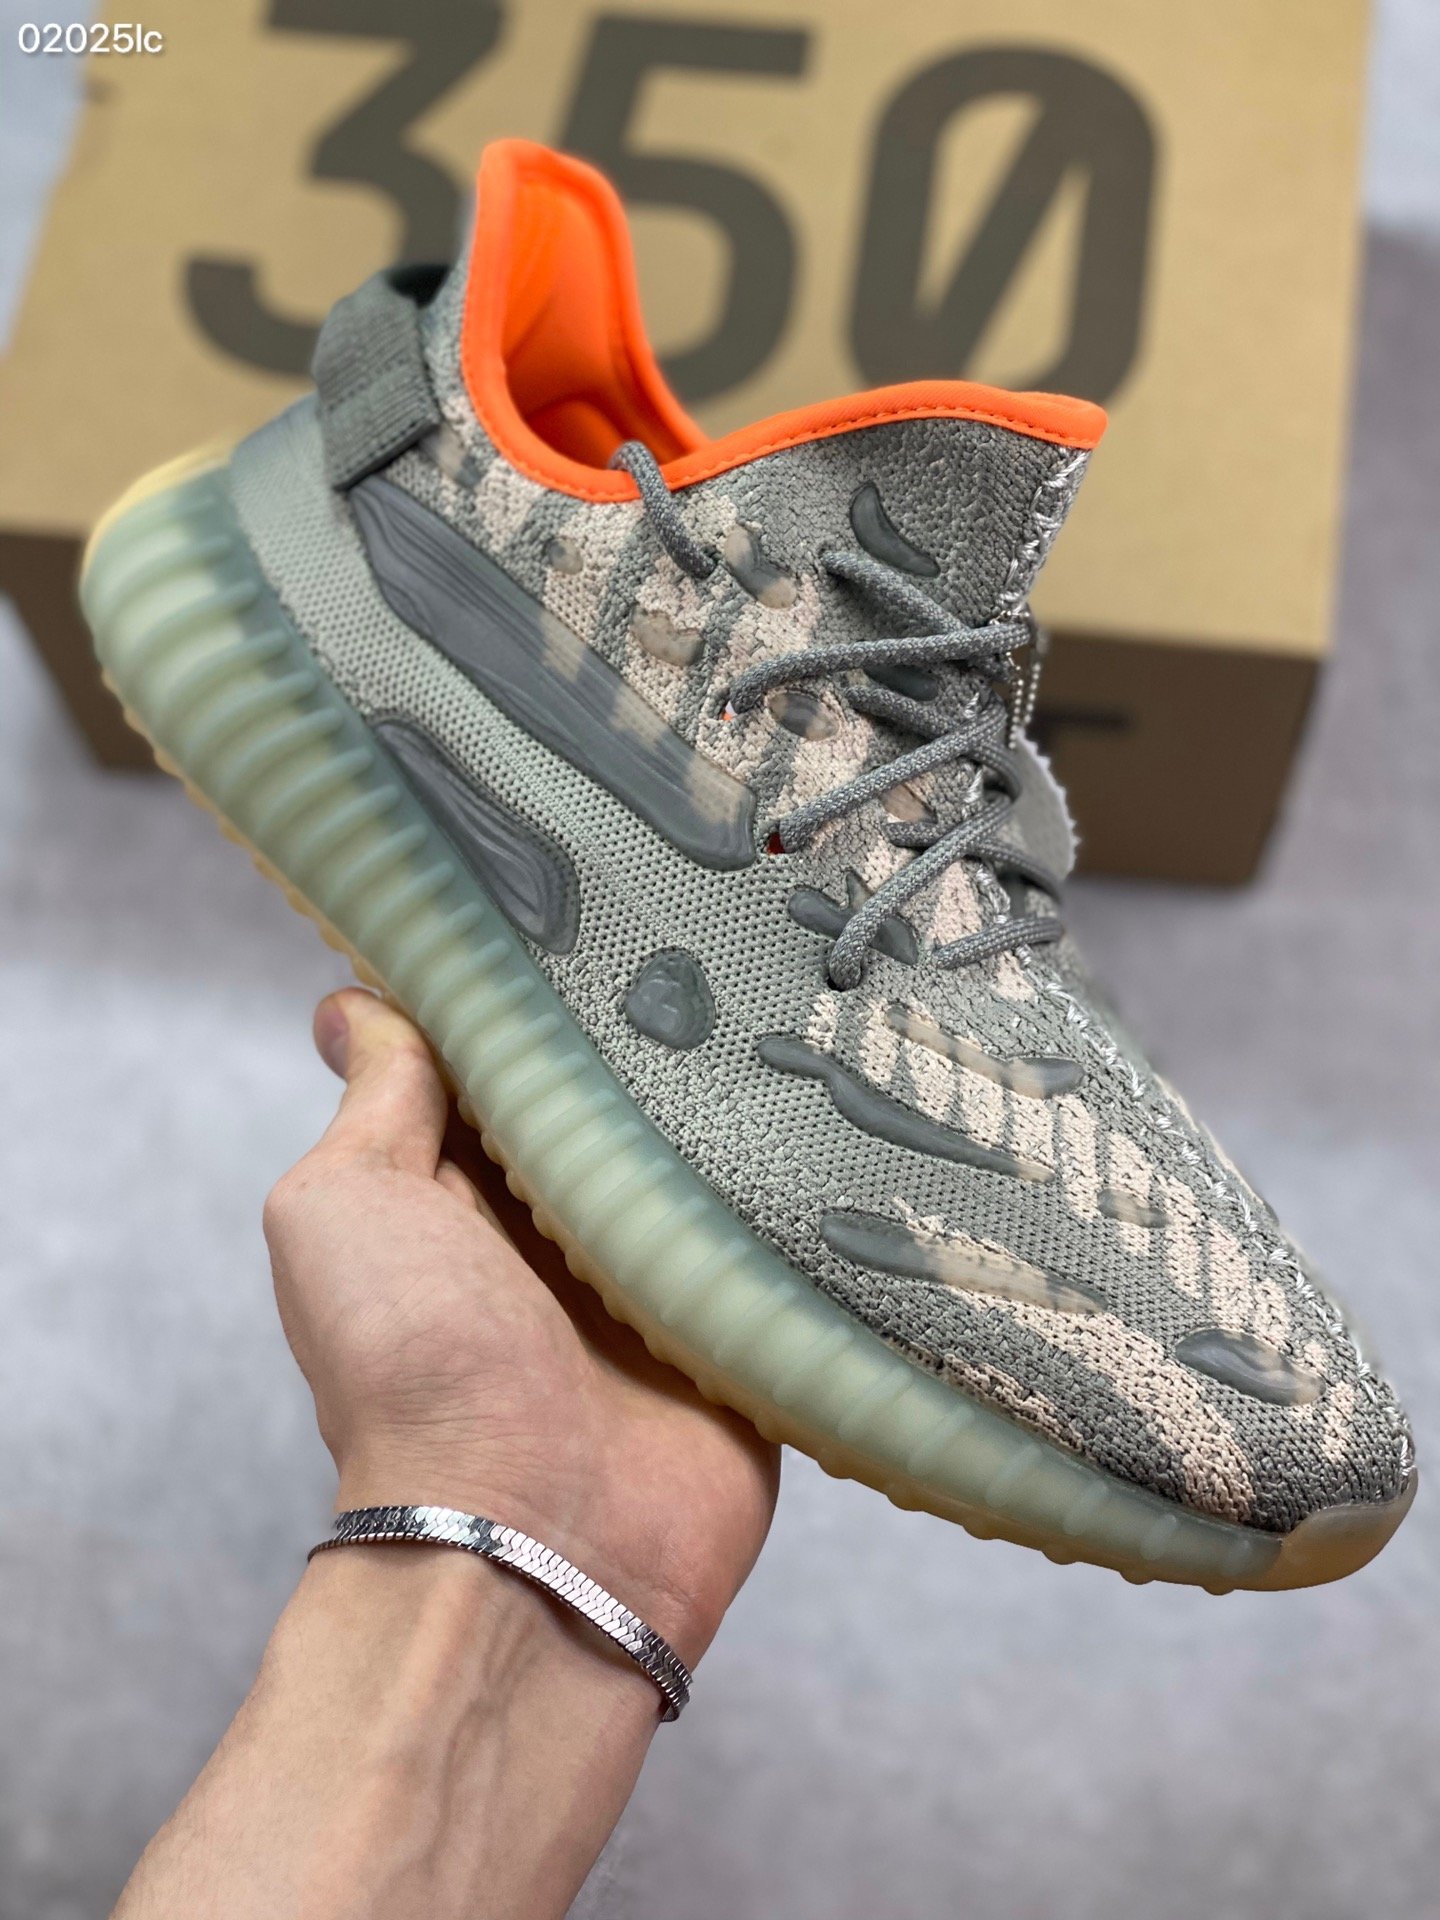 Cheap Adidas Yeezy Boost 350 V2 Ash Blue Gy7657 Size 65 Brand In Hand Free Shipping